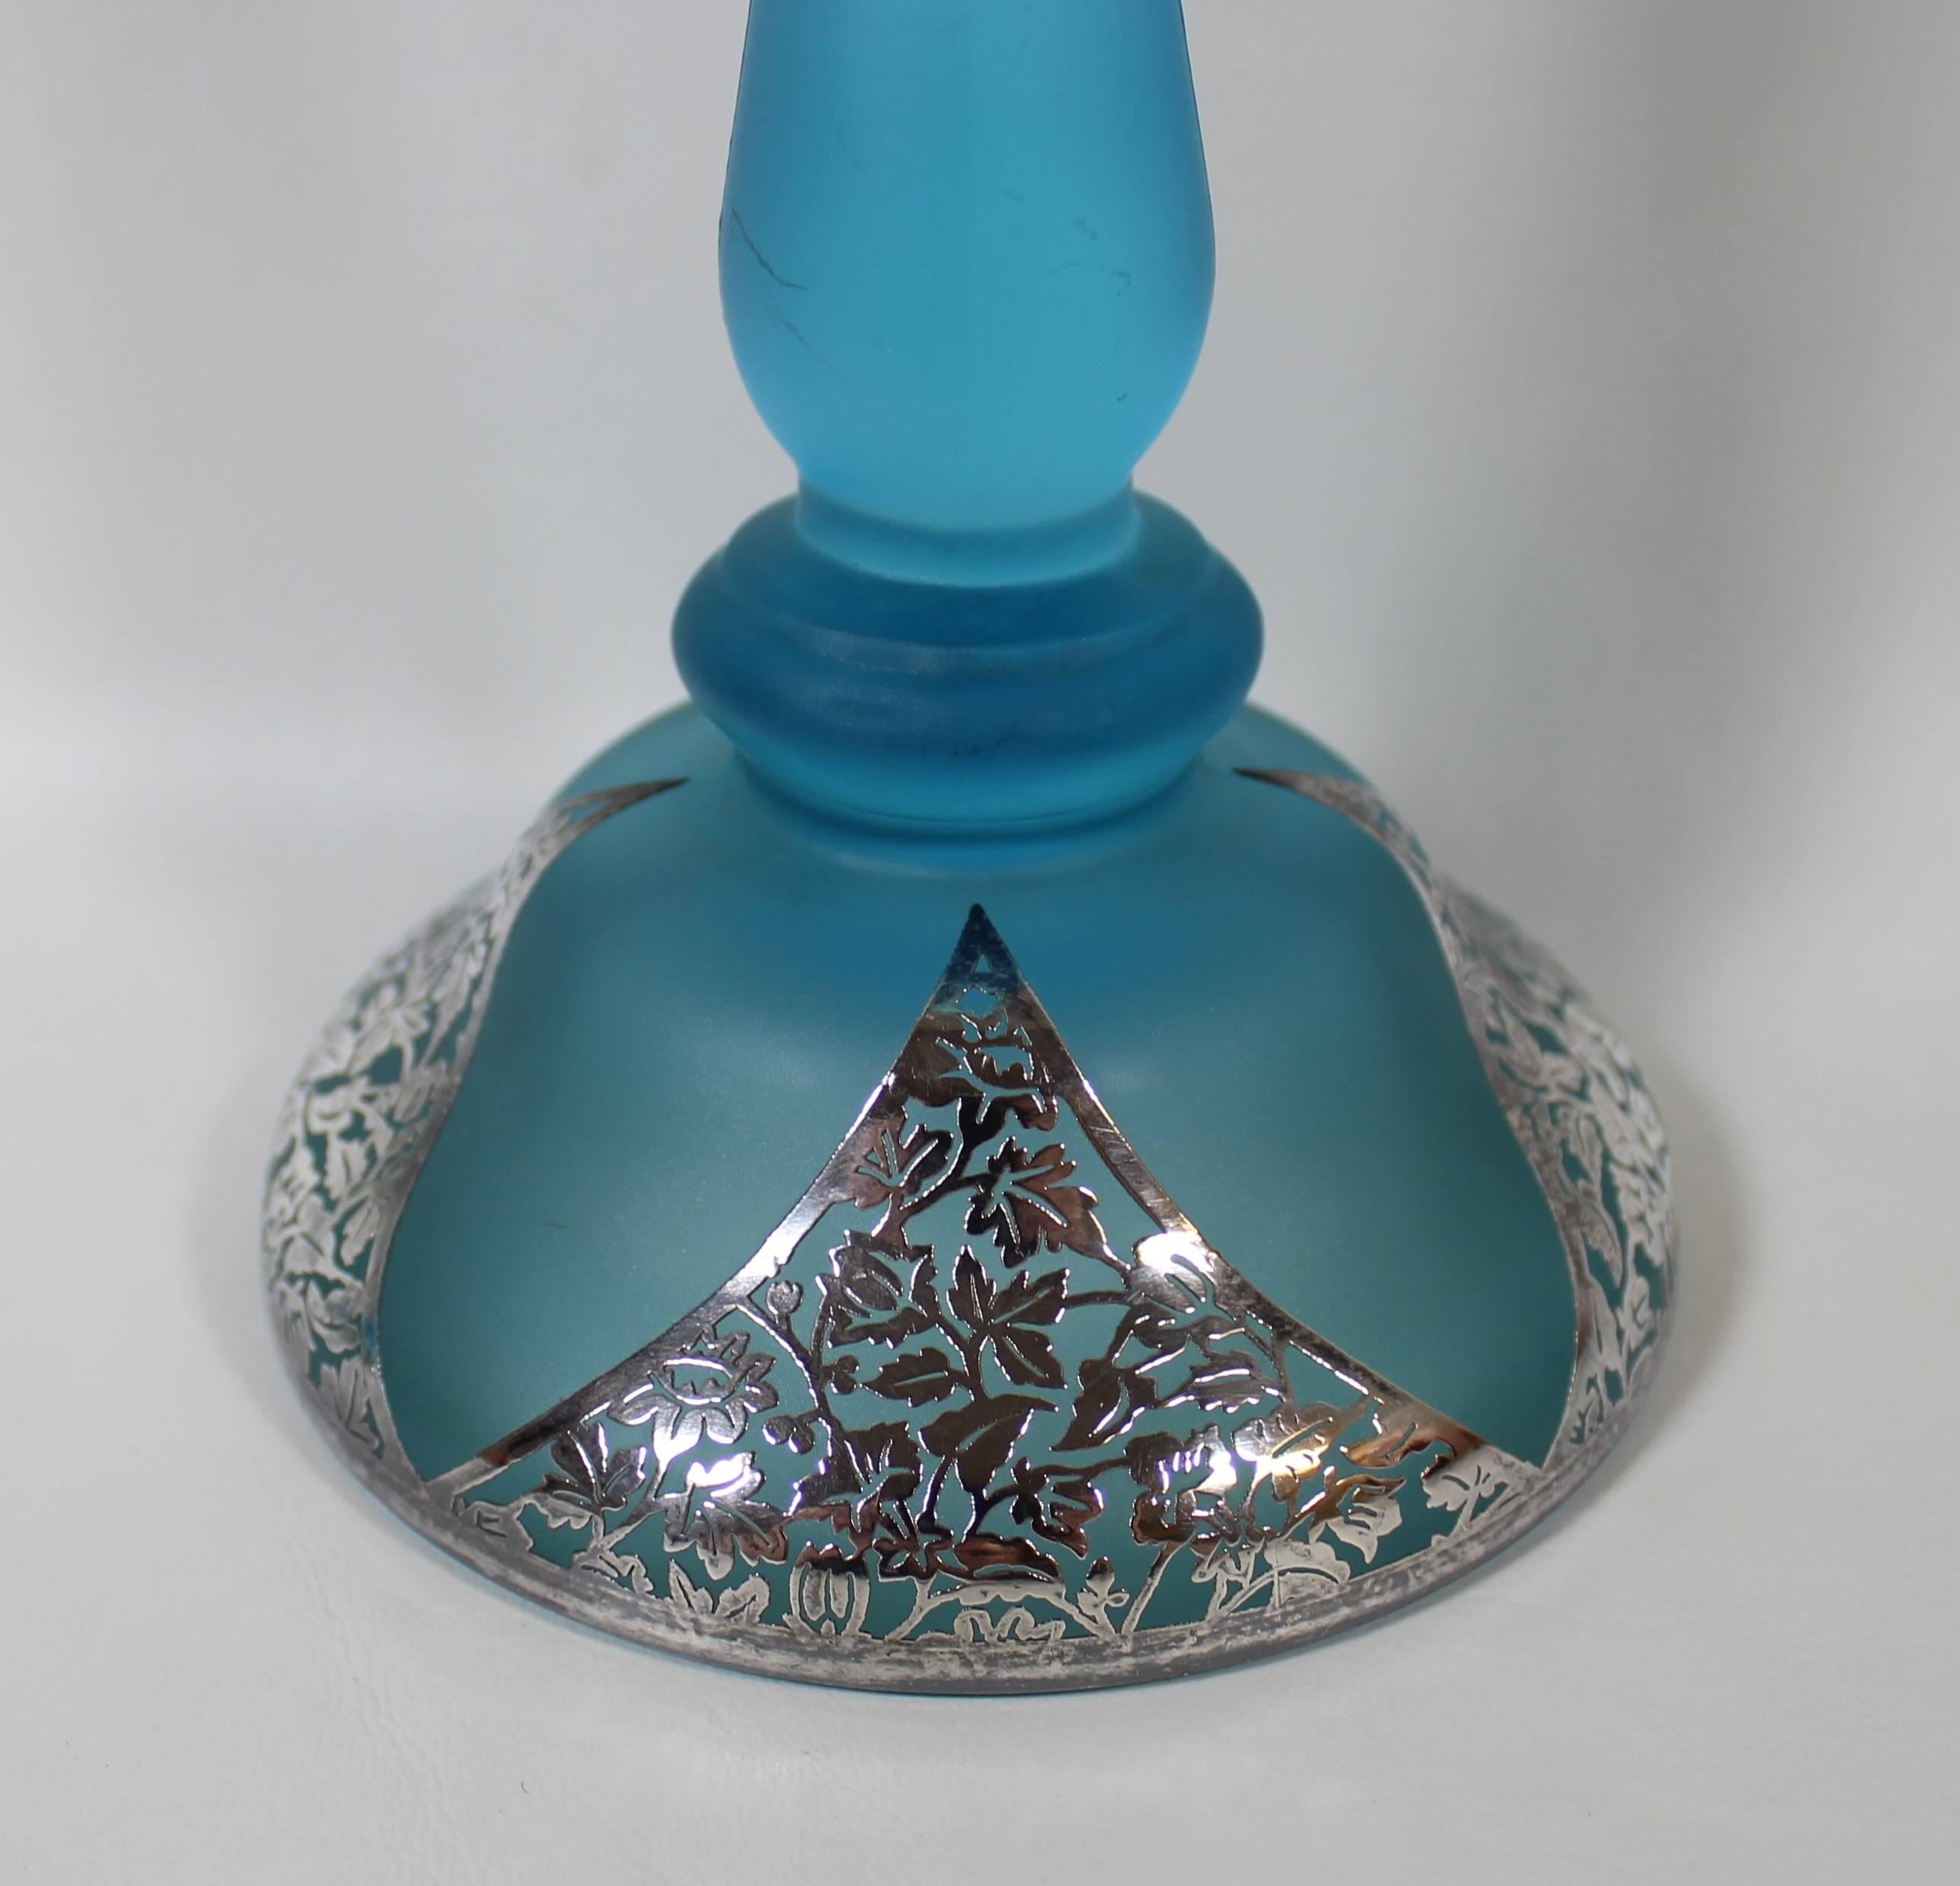 Pair of Art Nouveau Electric Blue Candlesticks with Silver Overlay 

Dramatic pair of opulent Orientalist style electric blue satin glass candle holders  with elegant silver overlay triangular cabuchons at base and silver overlay rims at